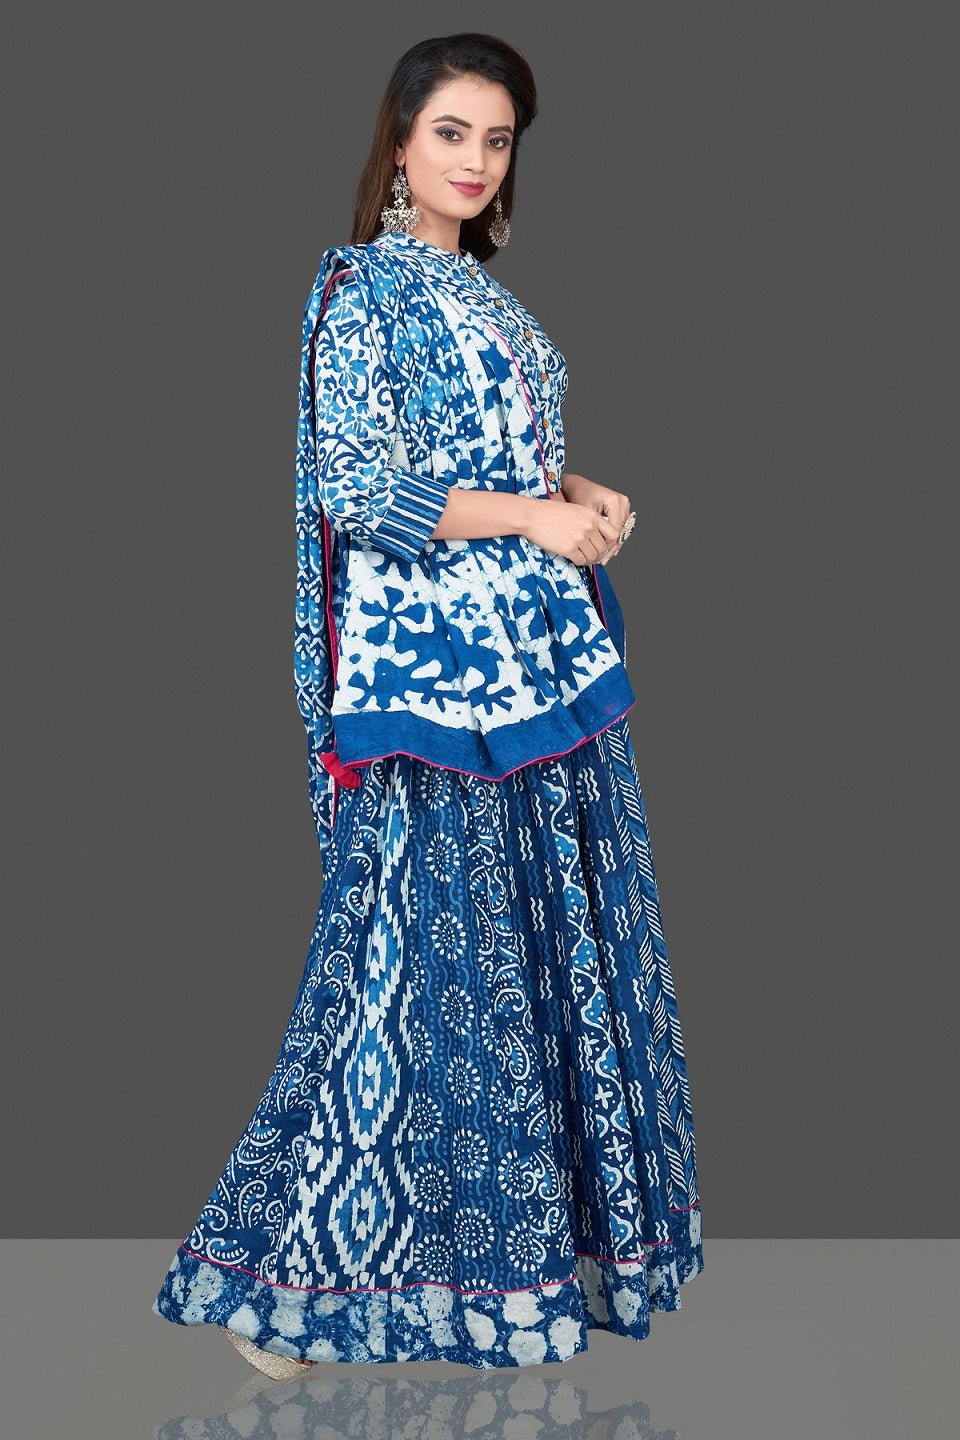 Buy beautiful blue and white Bagru block print skirt set with dupatta. Shop designer Indian clothing, wedding lehengas, designer Anarkali, gharara suits, Indian dresses in USA from Pure Elegance Indian fashions store for parties and special occasions.-side